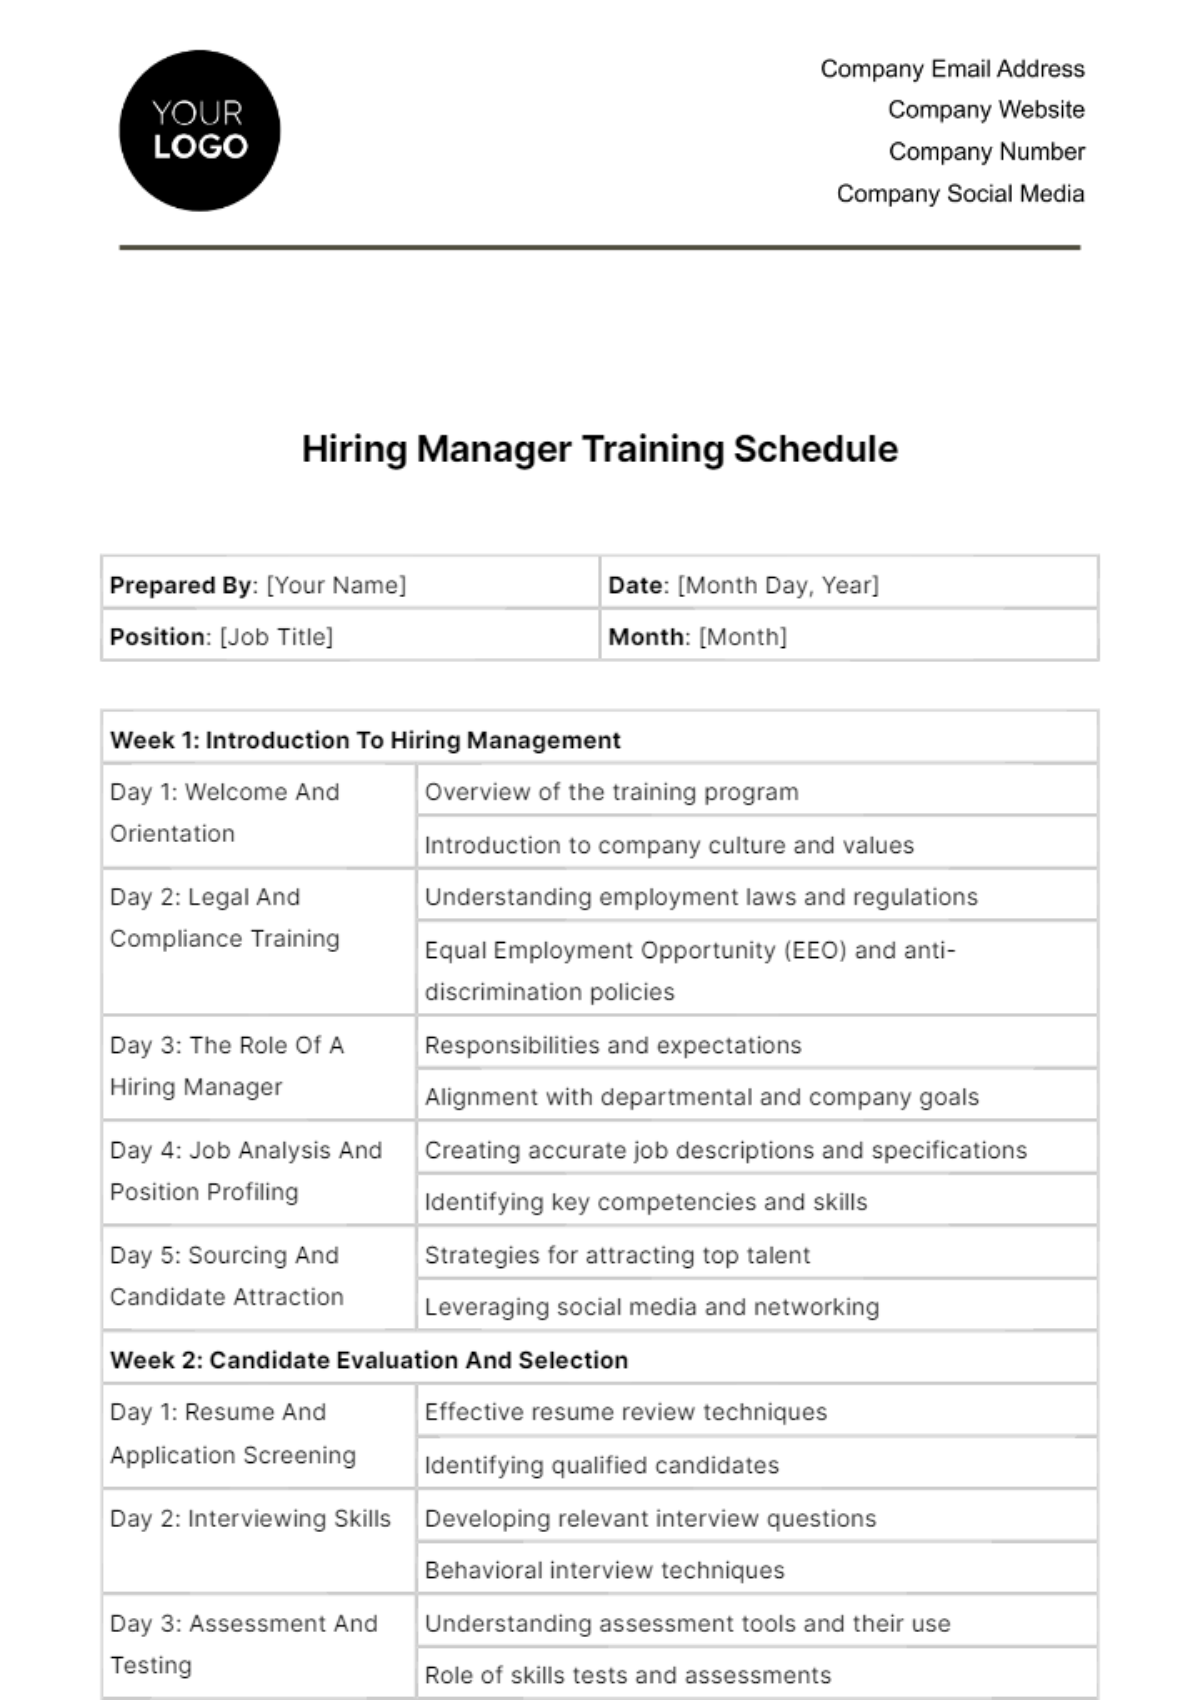 Free Hiring Manager Training Schedule HR Template